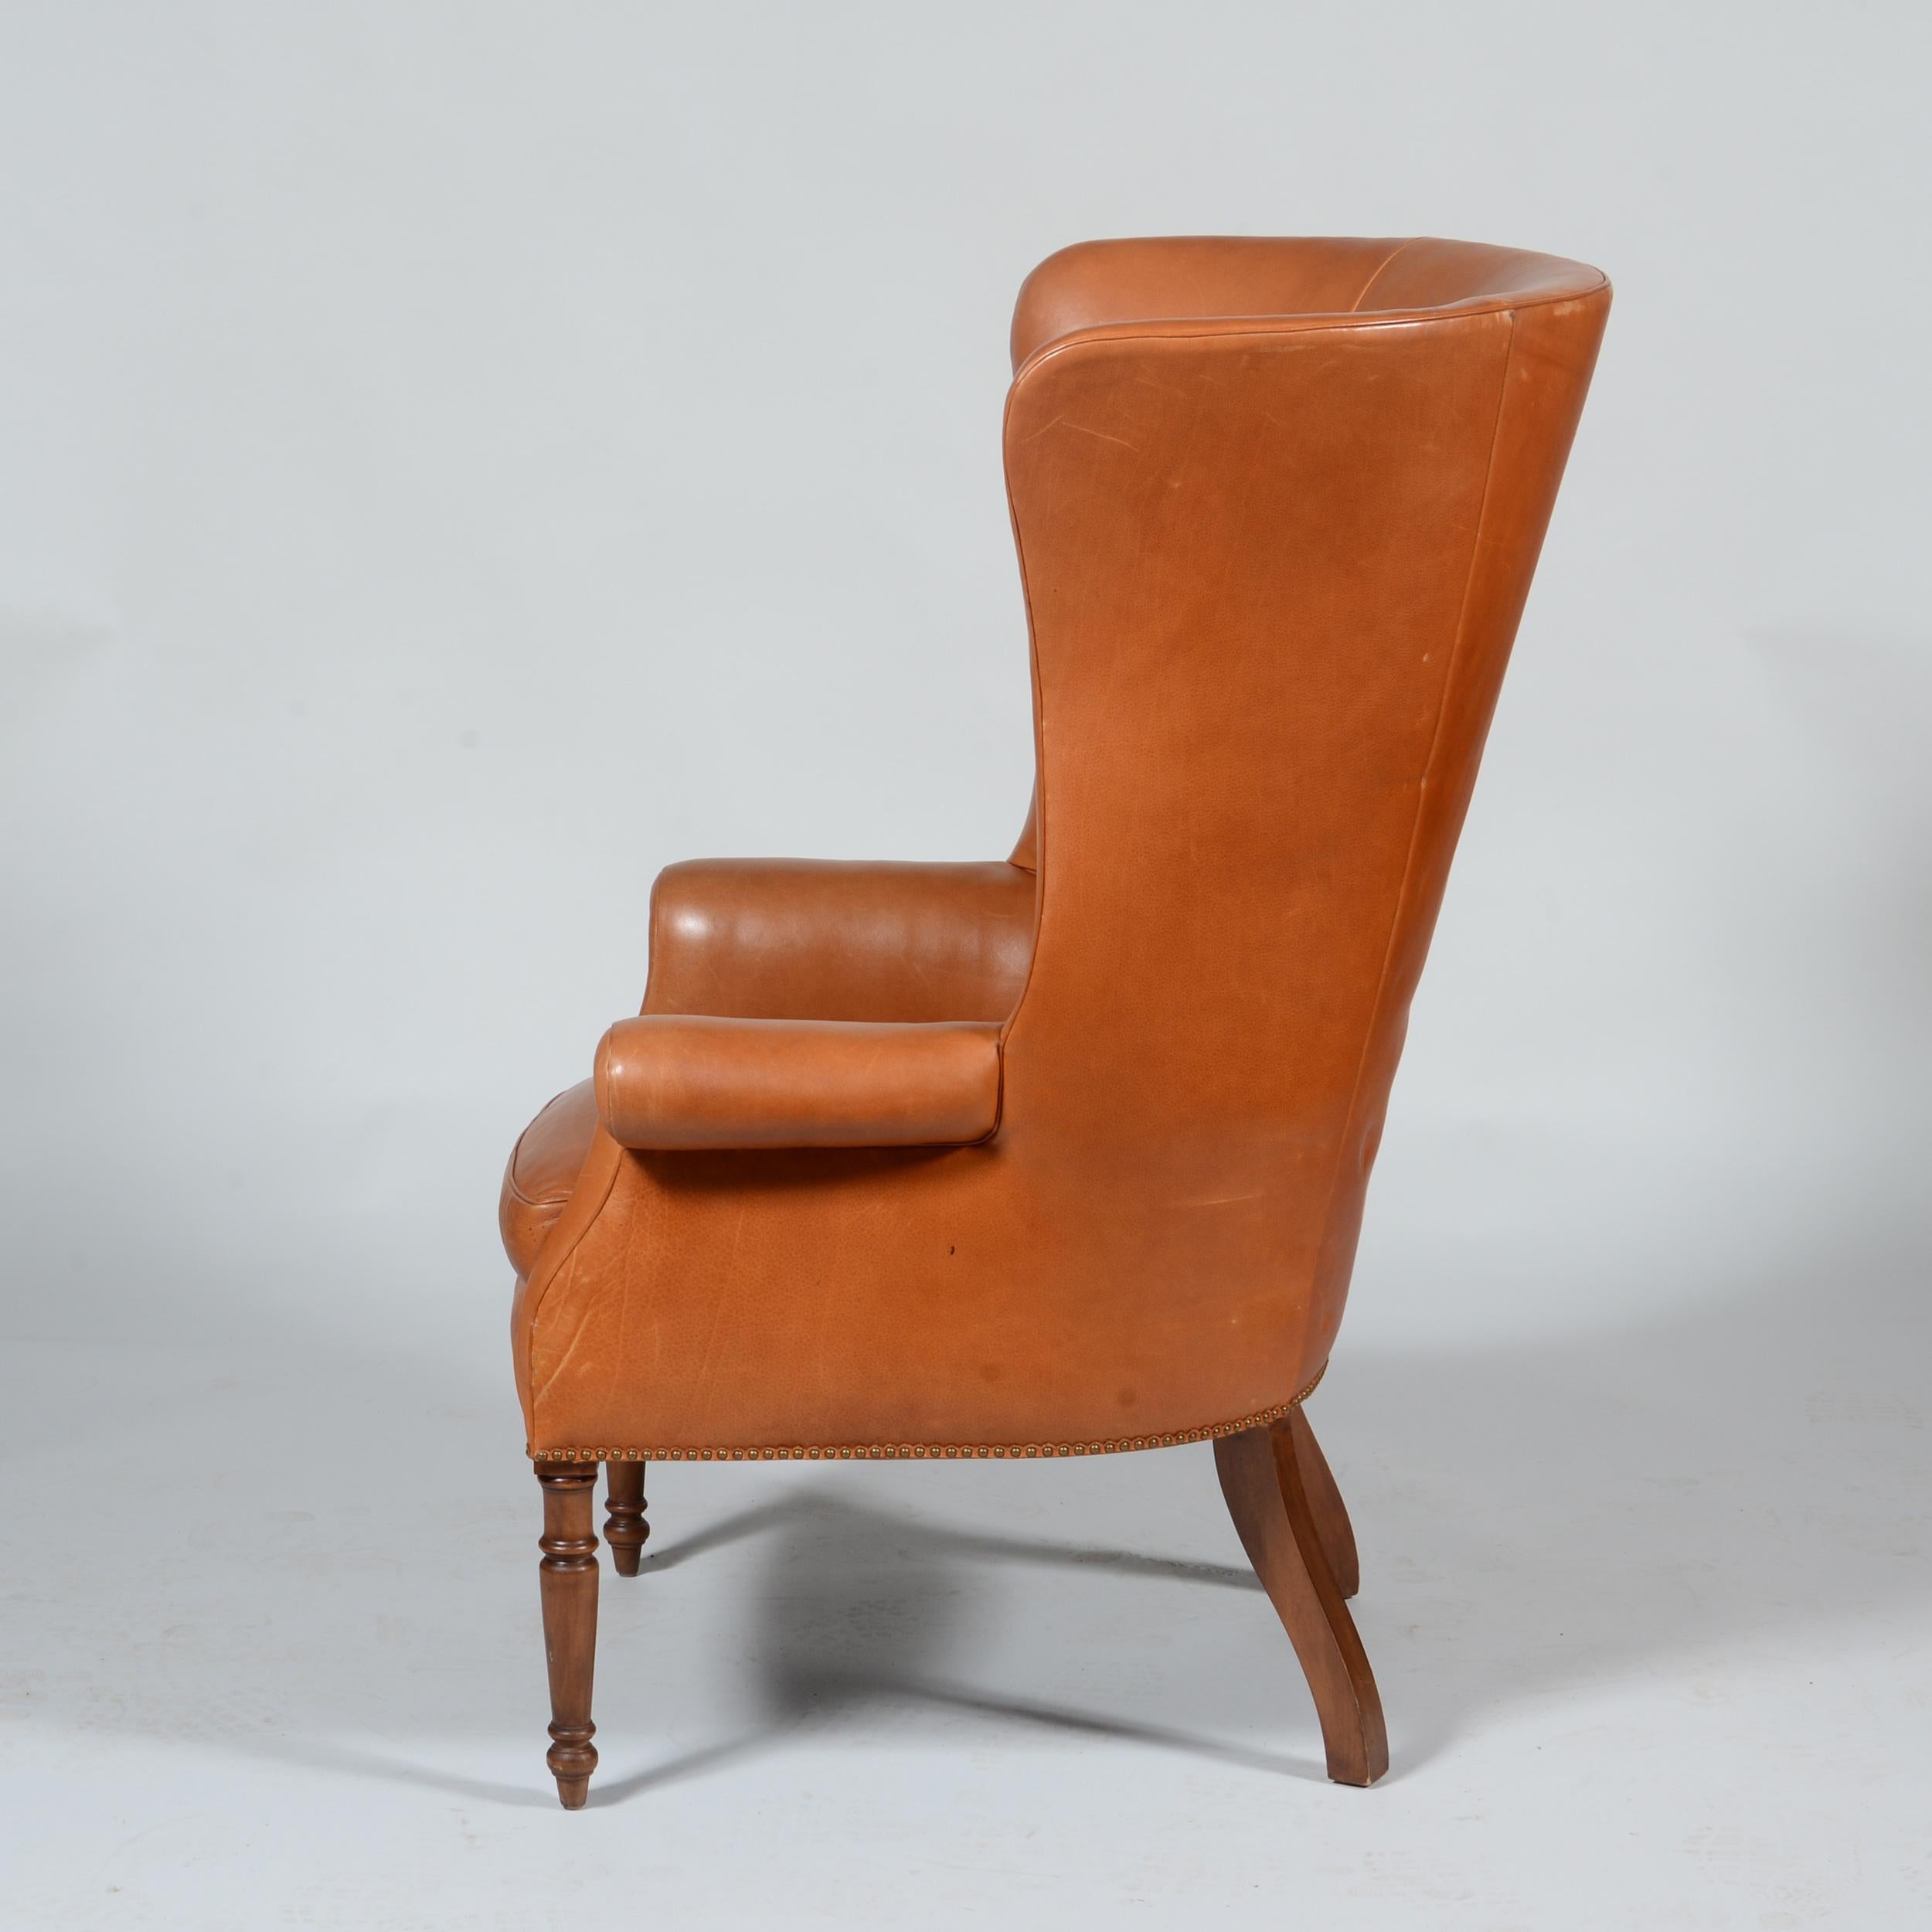 A classic pair of saddle leather high back wing back chairs that feature exaggerated proportions and a perfect amount of patina to the high quality leather. A look that would mix well with Modern and other classic looks.